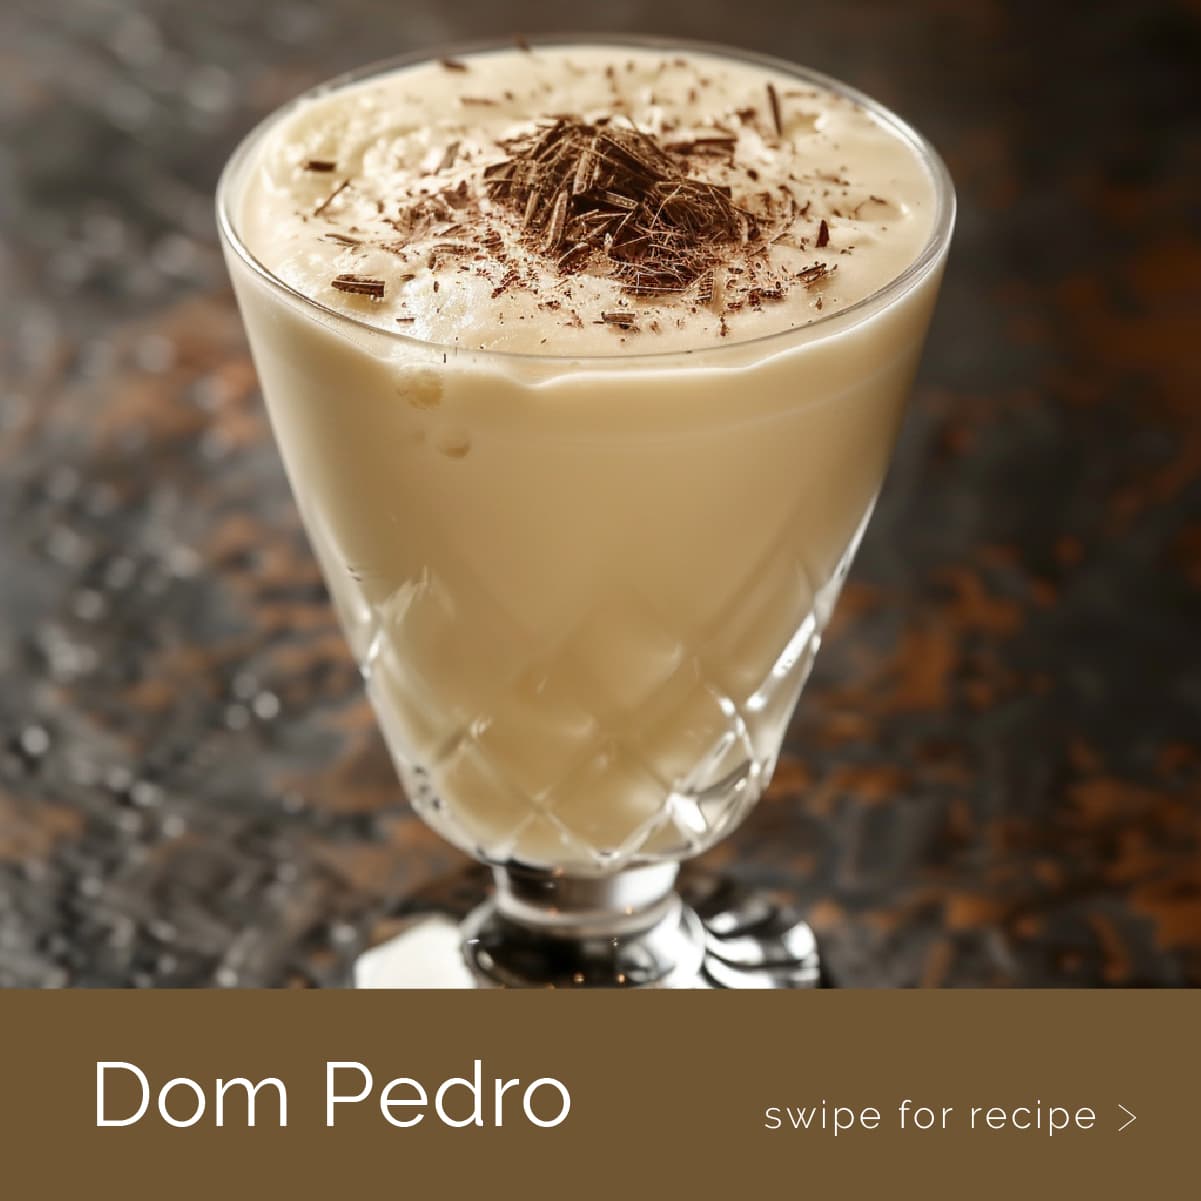 A Dom Pedro cocktail